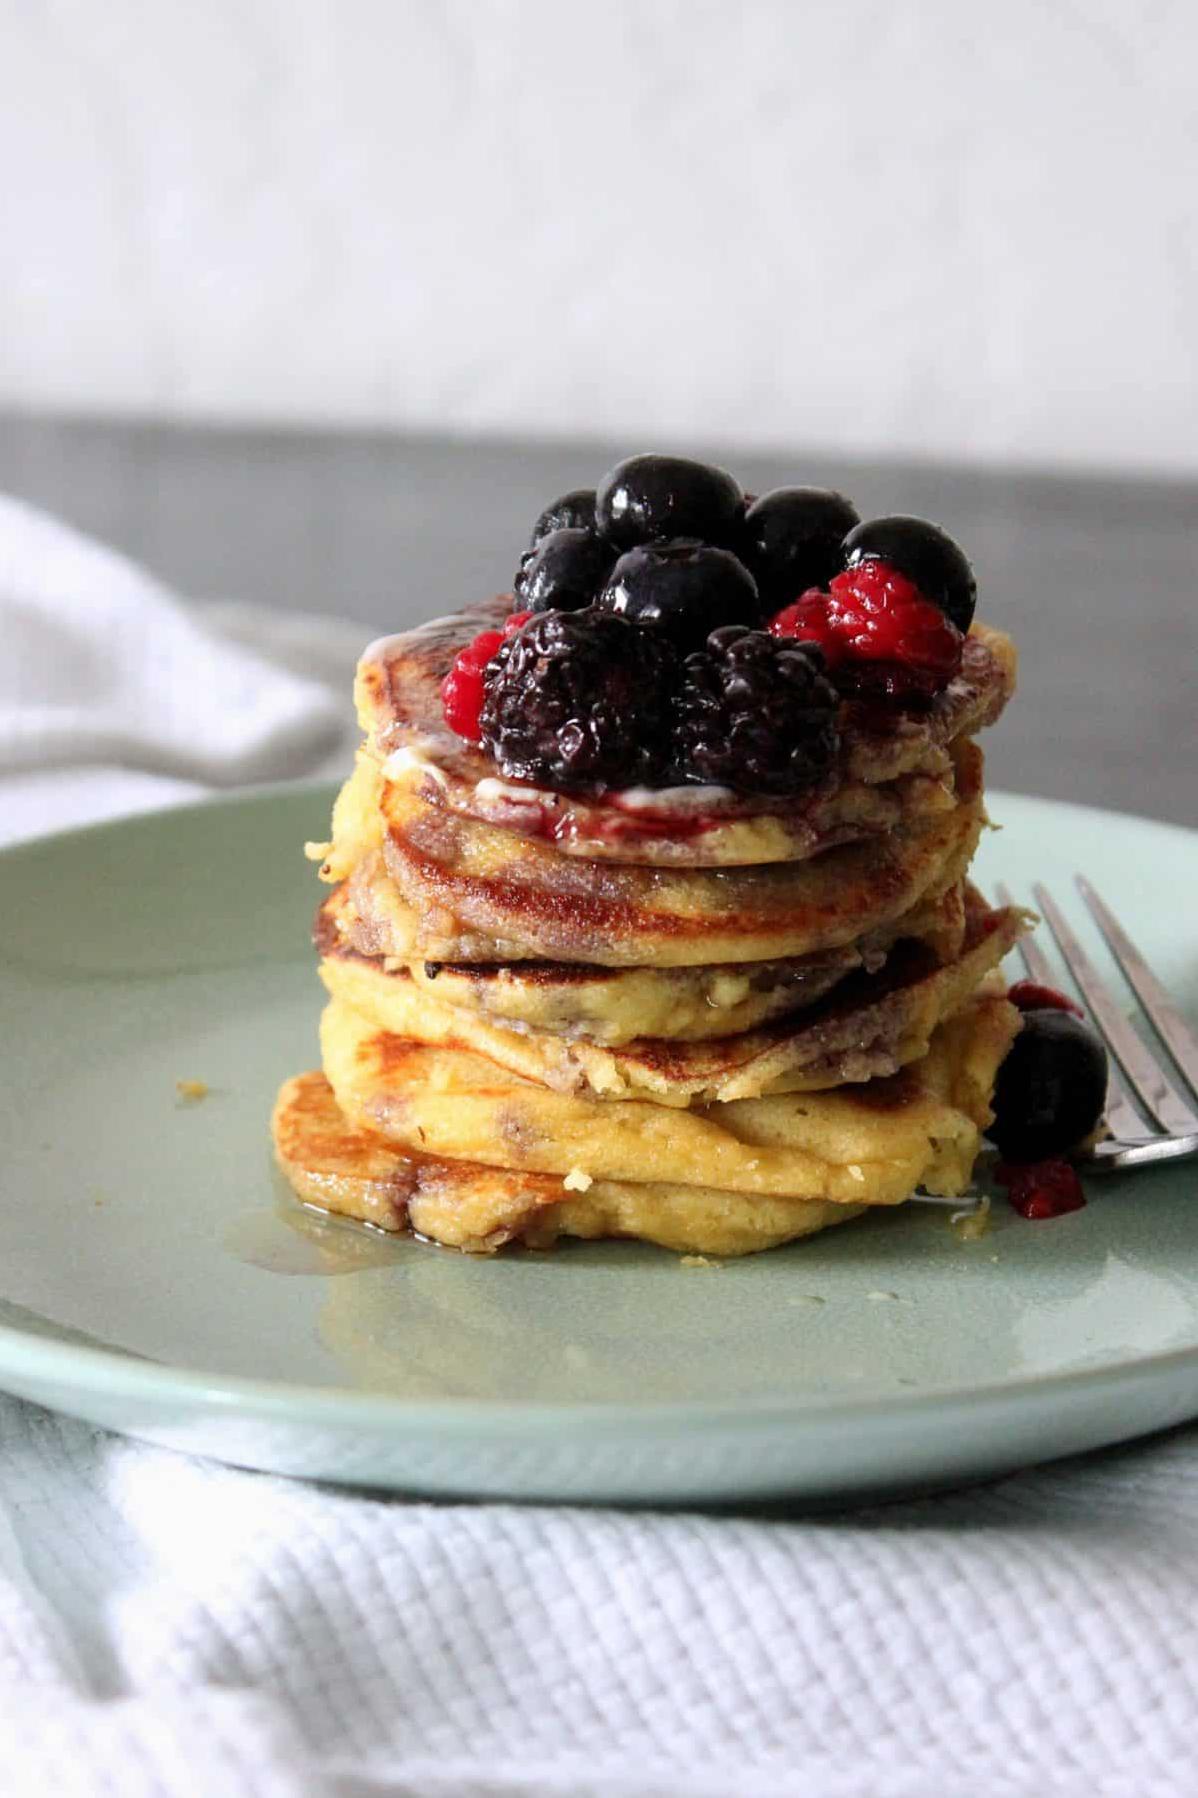  These silver dollar pancakes may be small, but they pack a mighty gluten-free punch.